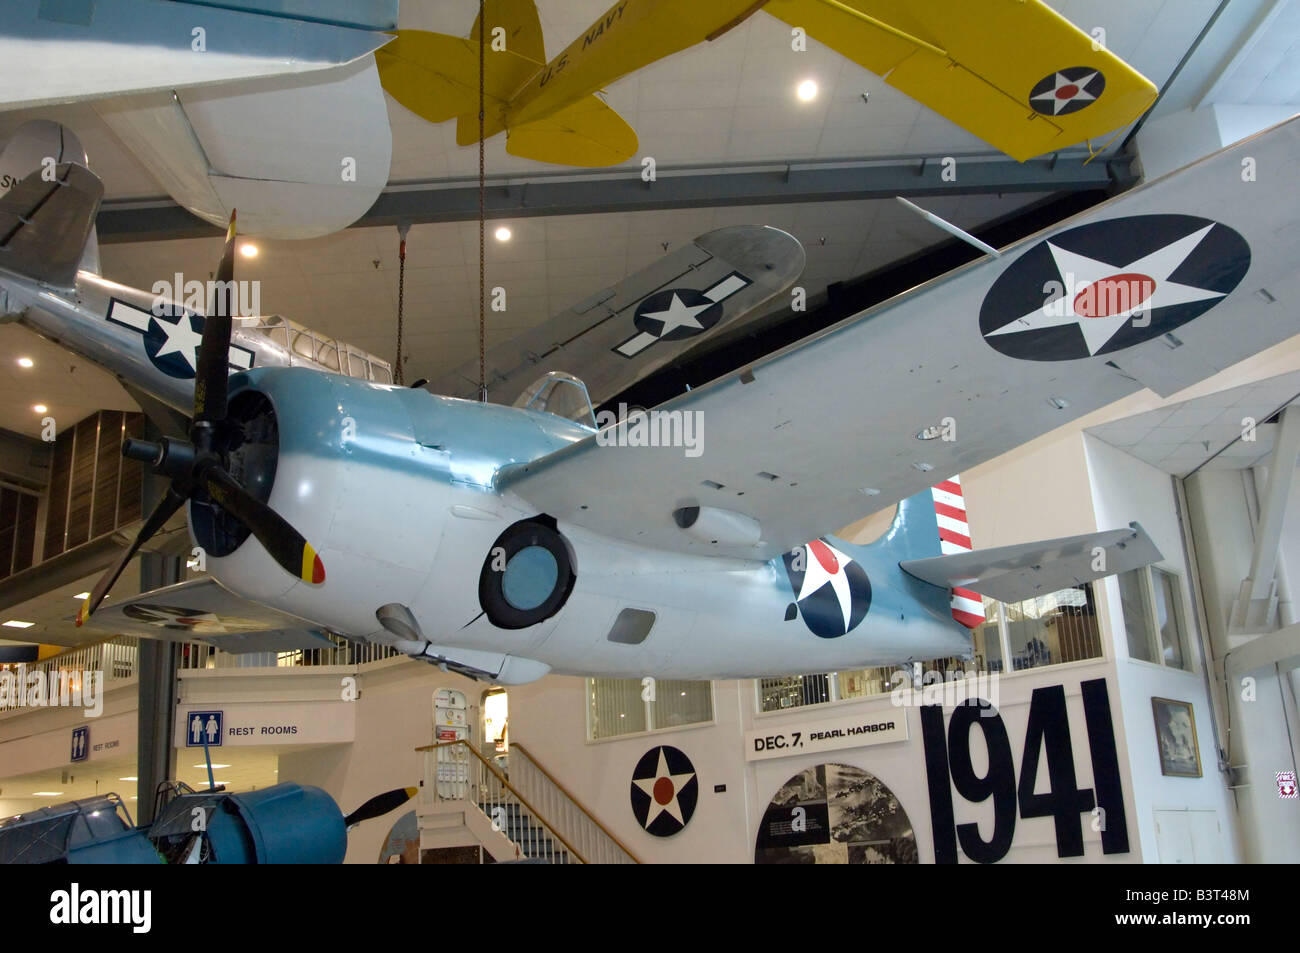 A Grumman F4F Wildcat Navy fighter aircraft on static display at the Naval Air Museum, NAS Pensacola, Florida Stock Photo